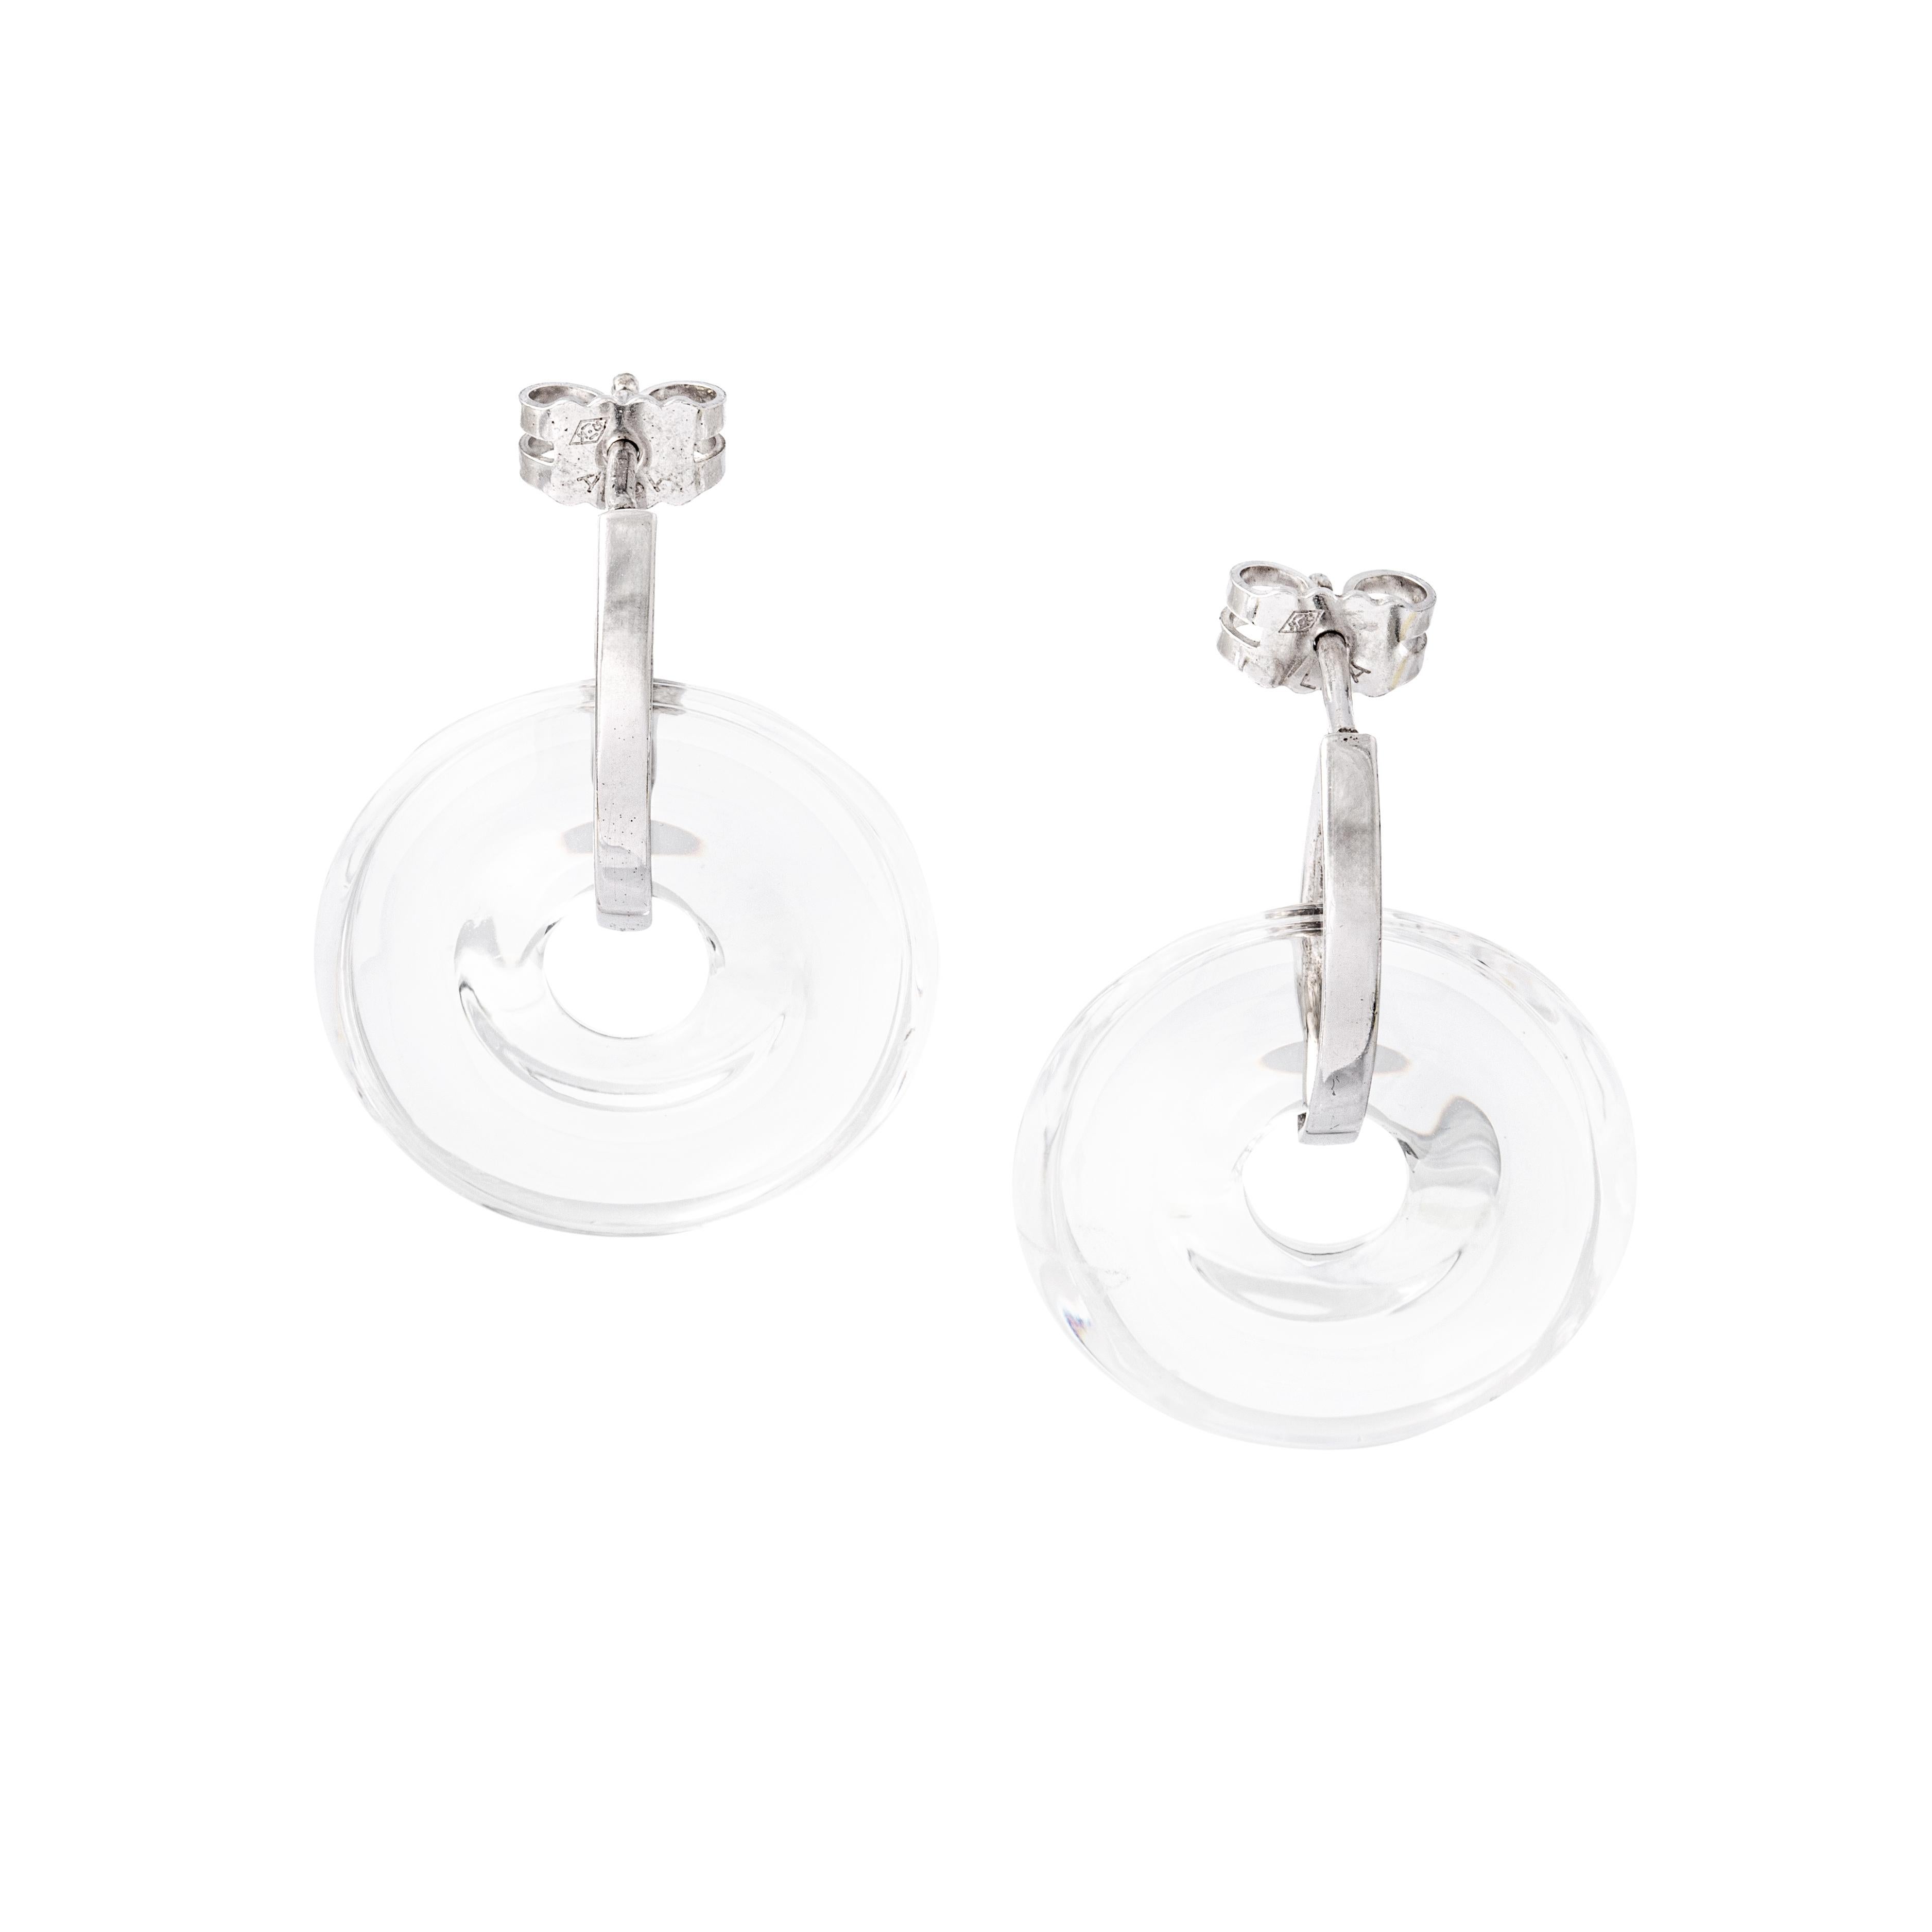 Embrace timeless sophistication with Baccarat Rock Crystal Silver Earrings – a captivating blend of elegance and crystal clarity.

Height: 2.90 centimeters.
Width: 2.30 centimeters.

Total weight: 9.53 grams.
